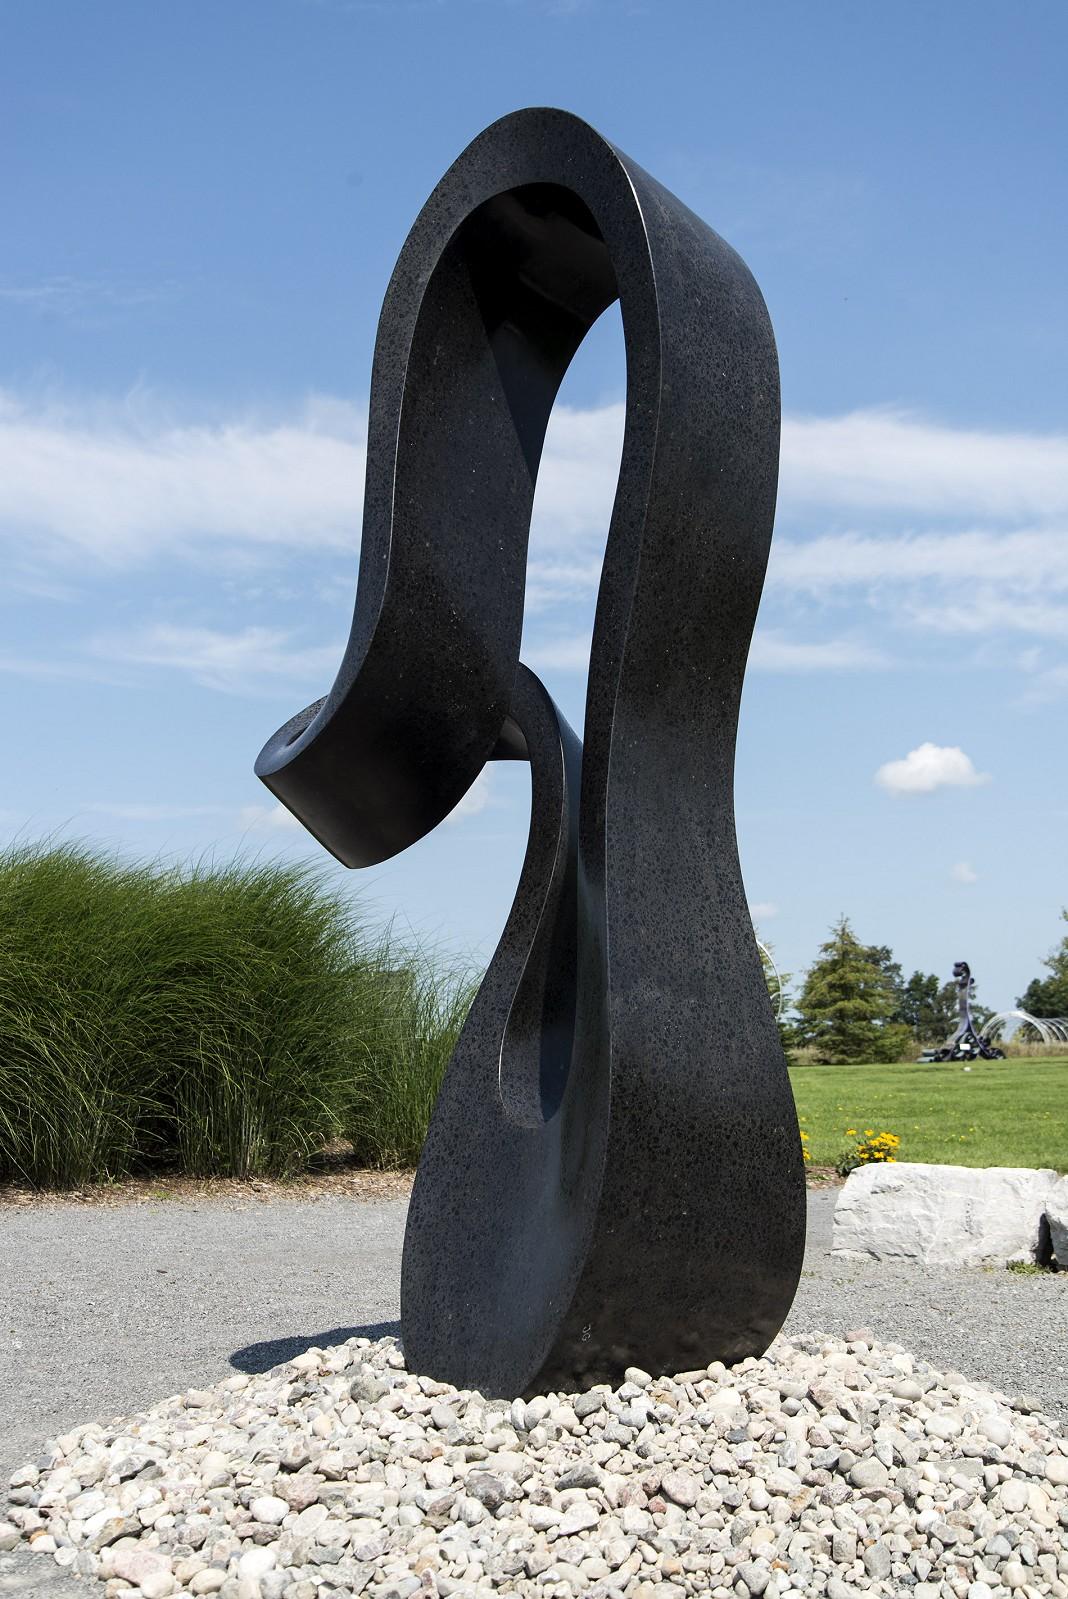 Signature No 4 - large, smooth, black granite, outdoor, abstract, sculpture - Sculpture by Jeremy Guy